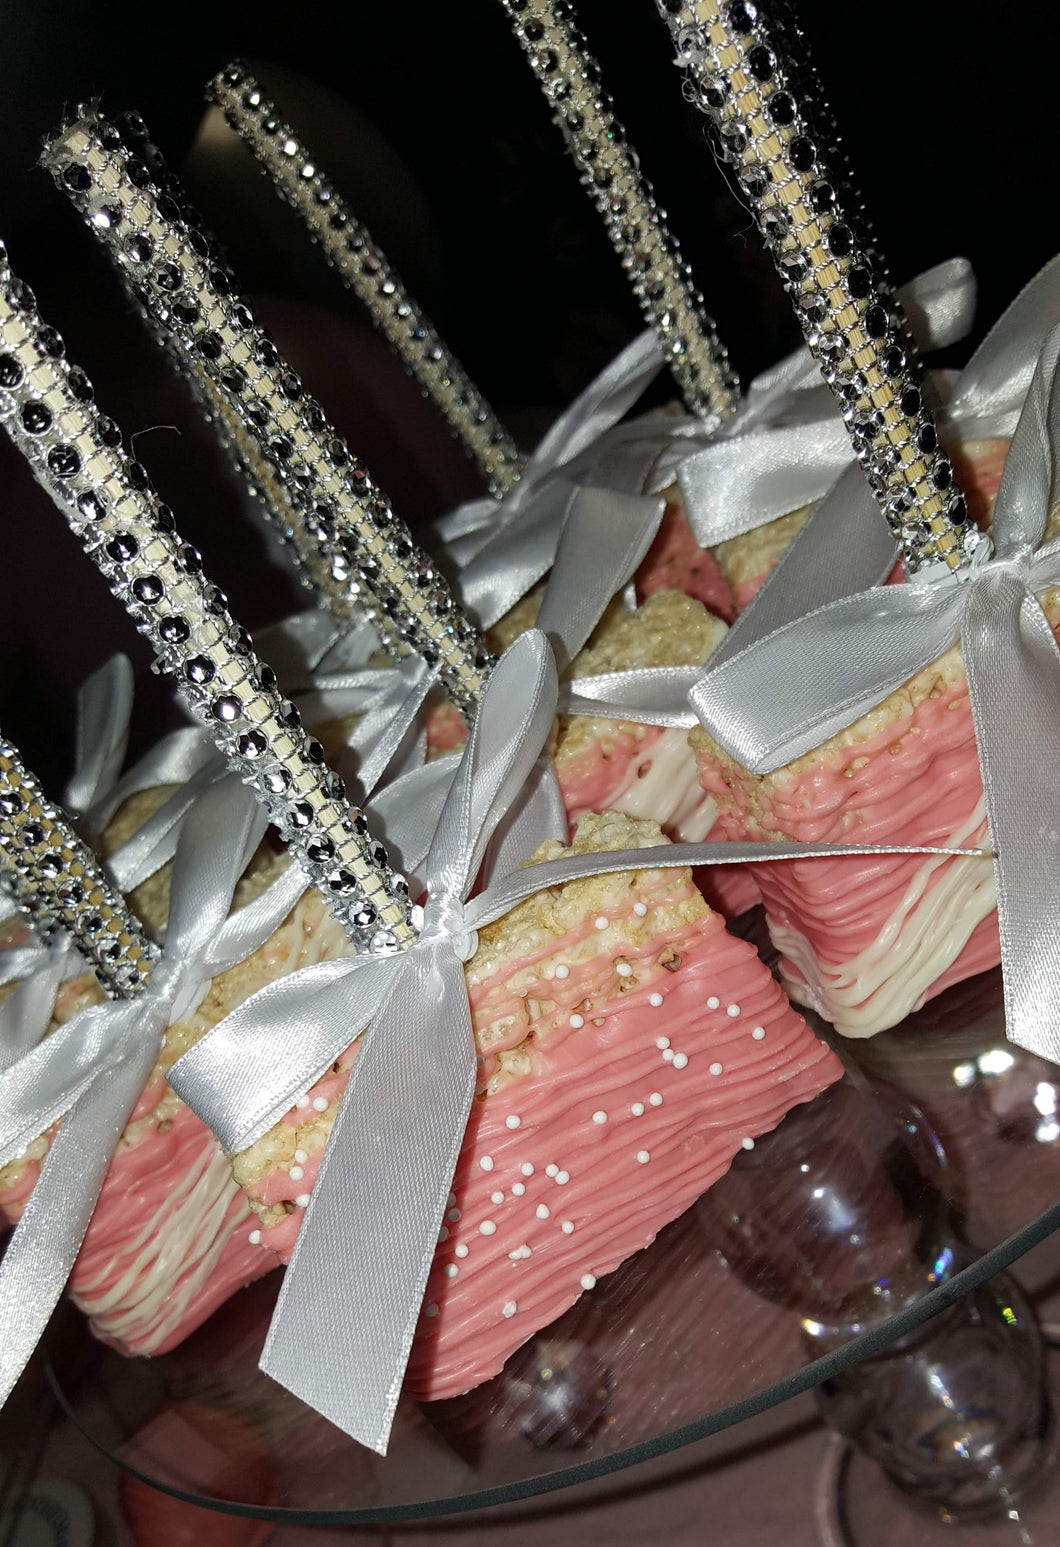 Rice Krispie Treats - Chocolate Covered/Dipped (Pink)